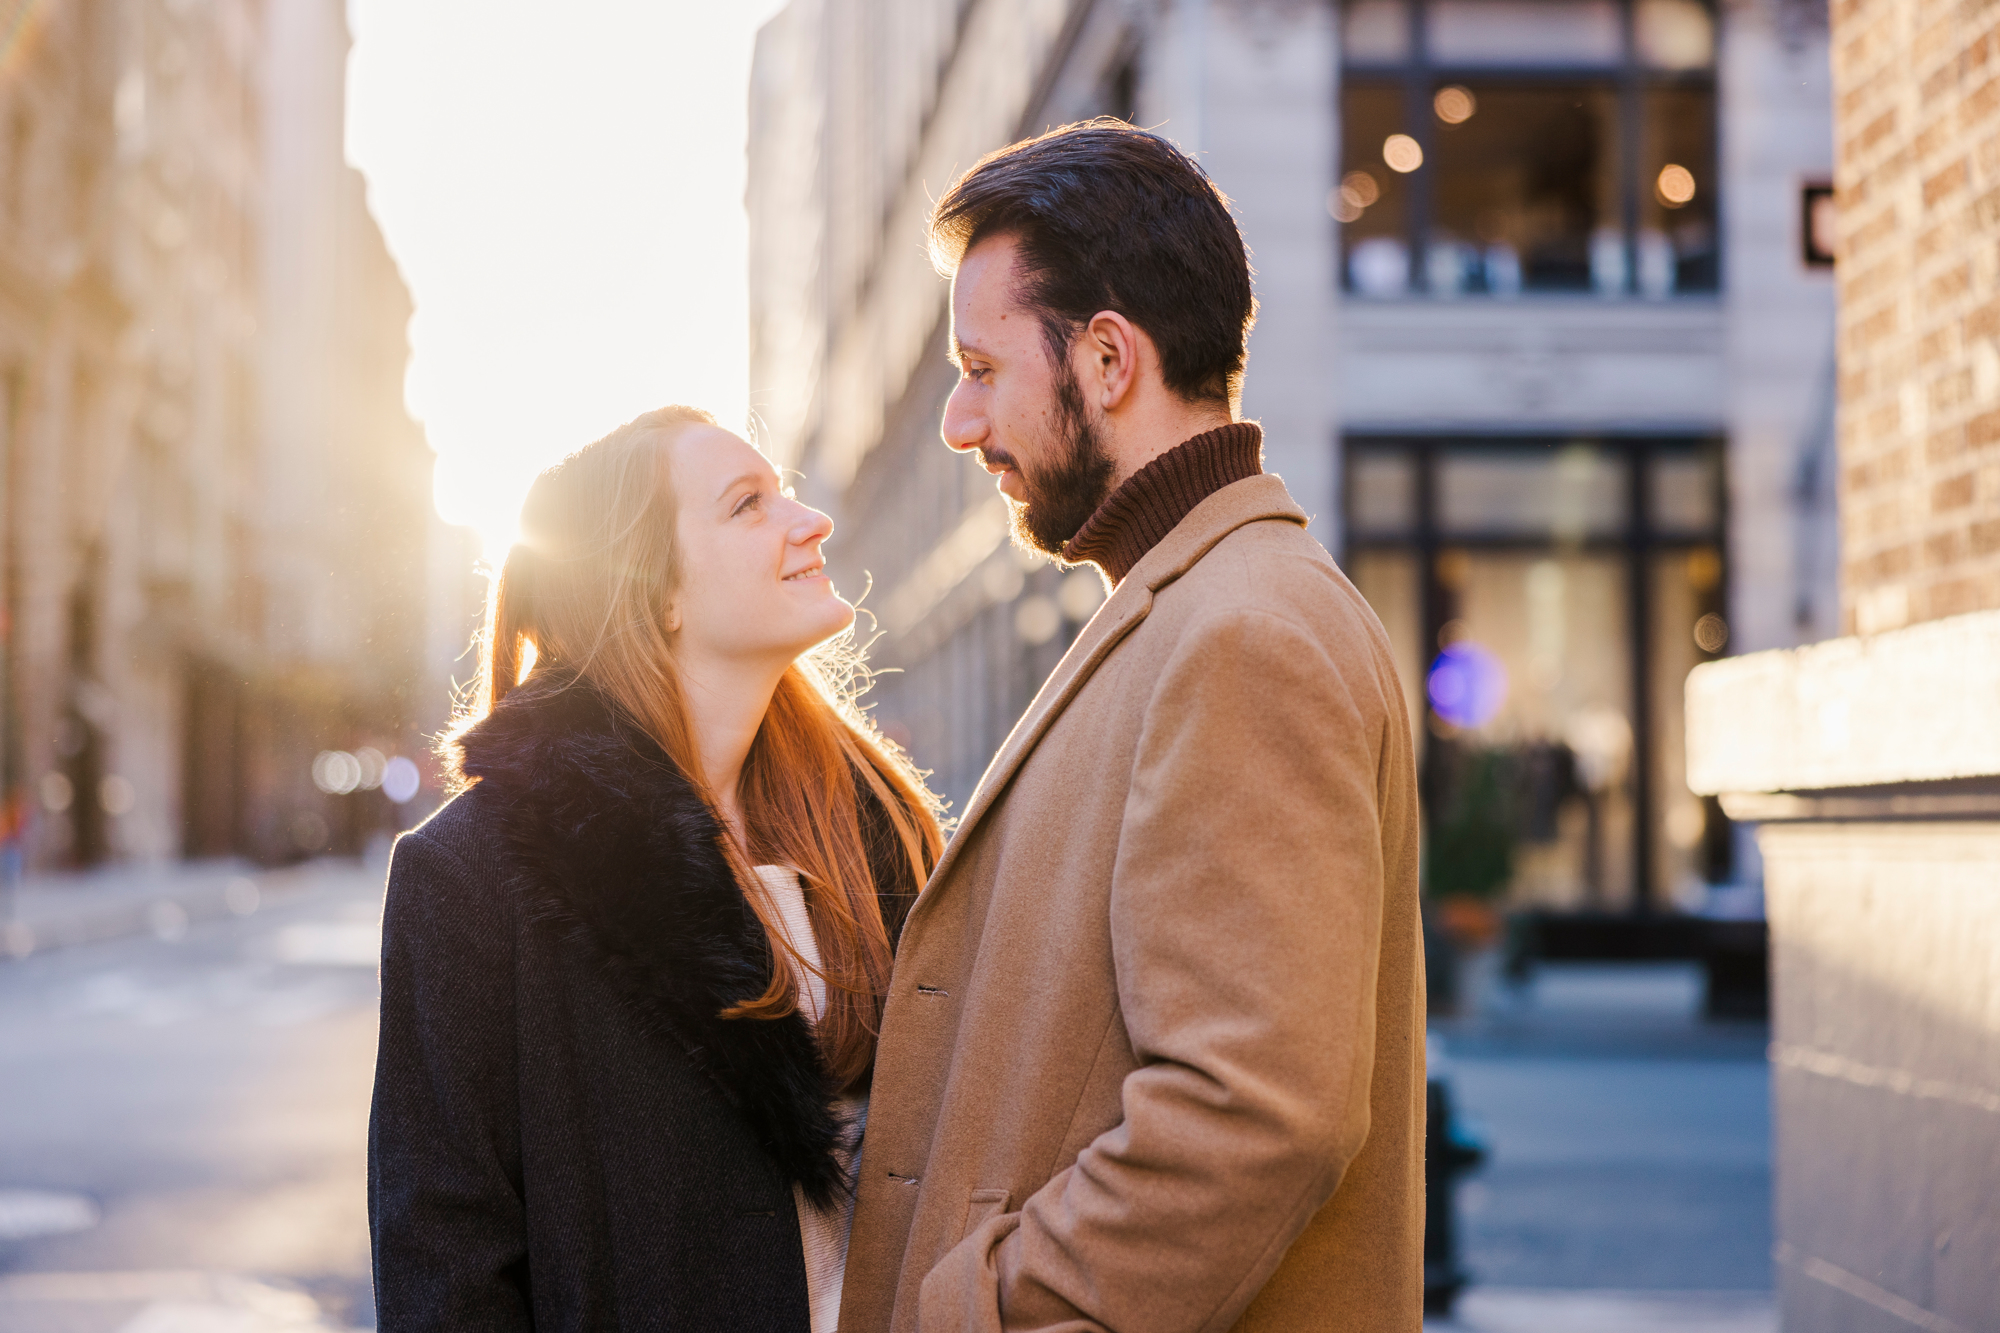 Cheerful Engagement Photos in Soho